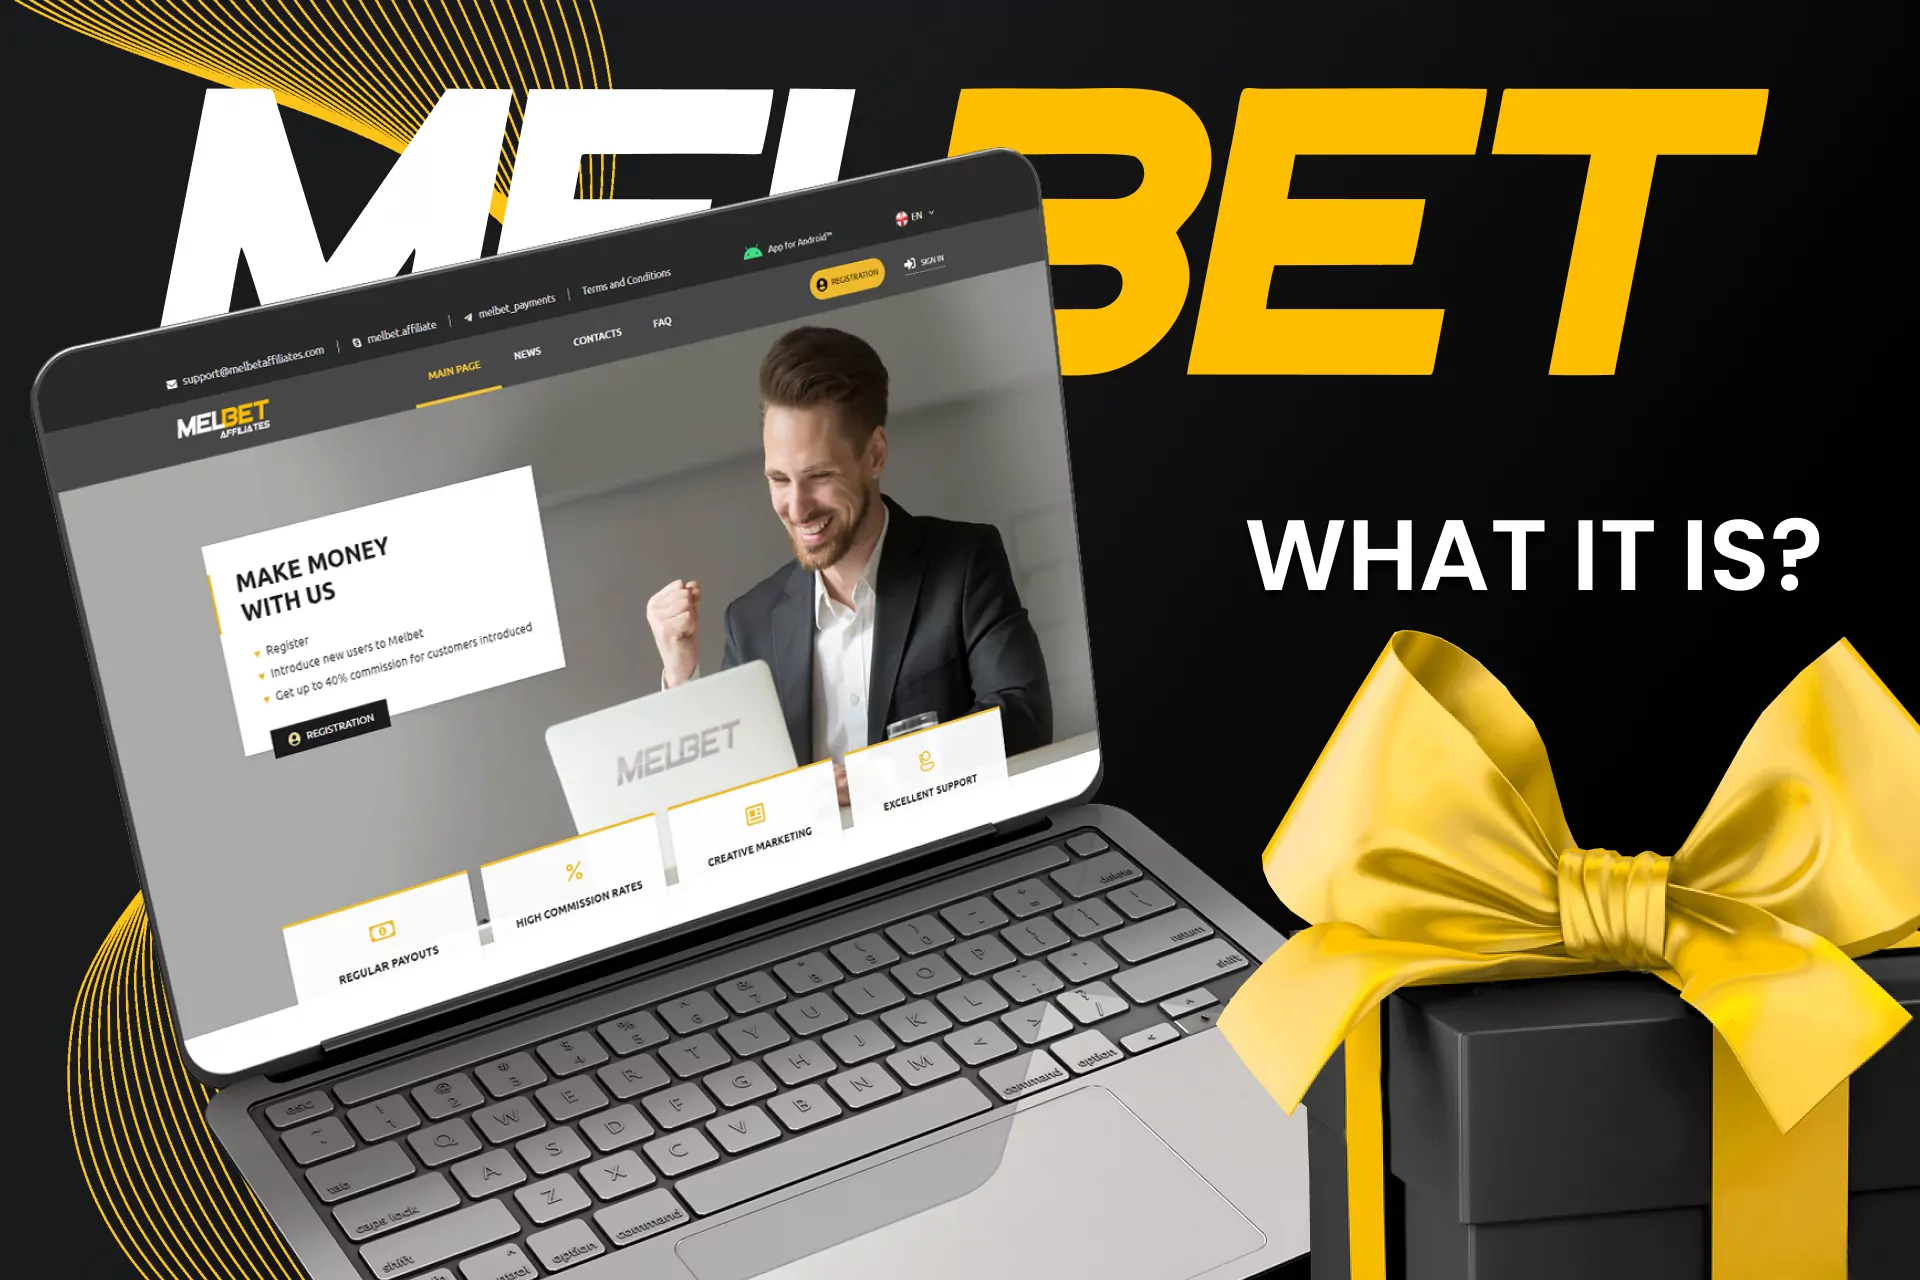 Find out information about the Melbet affiliate program.